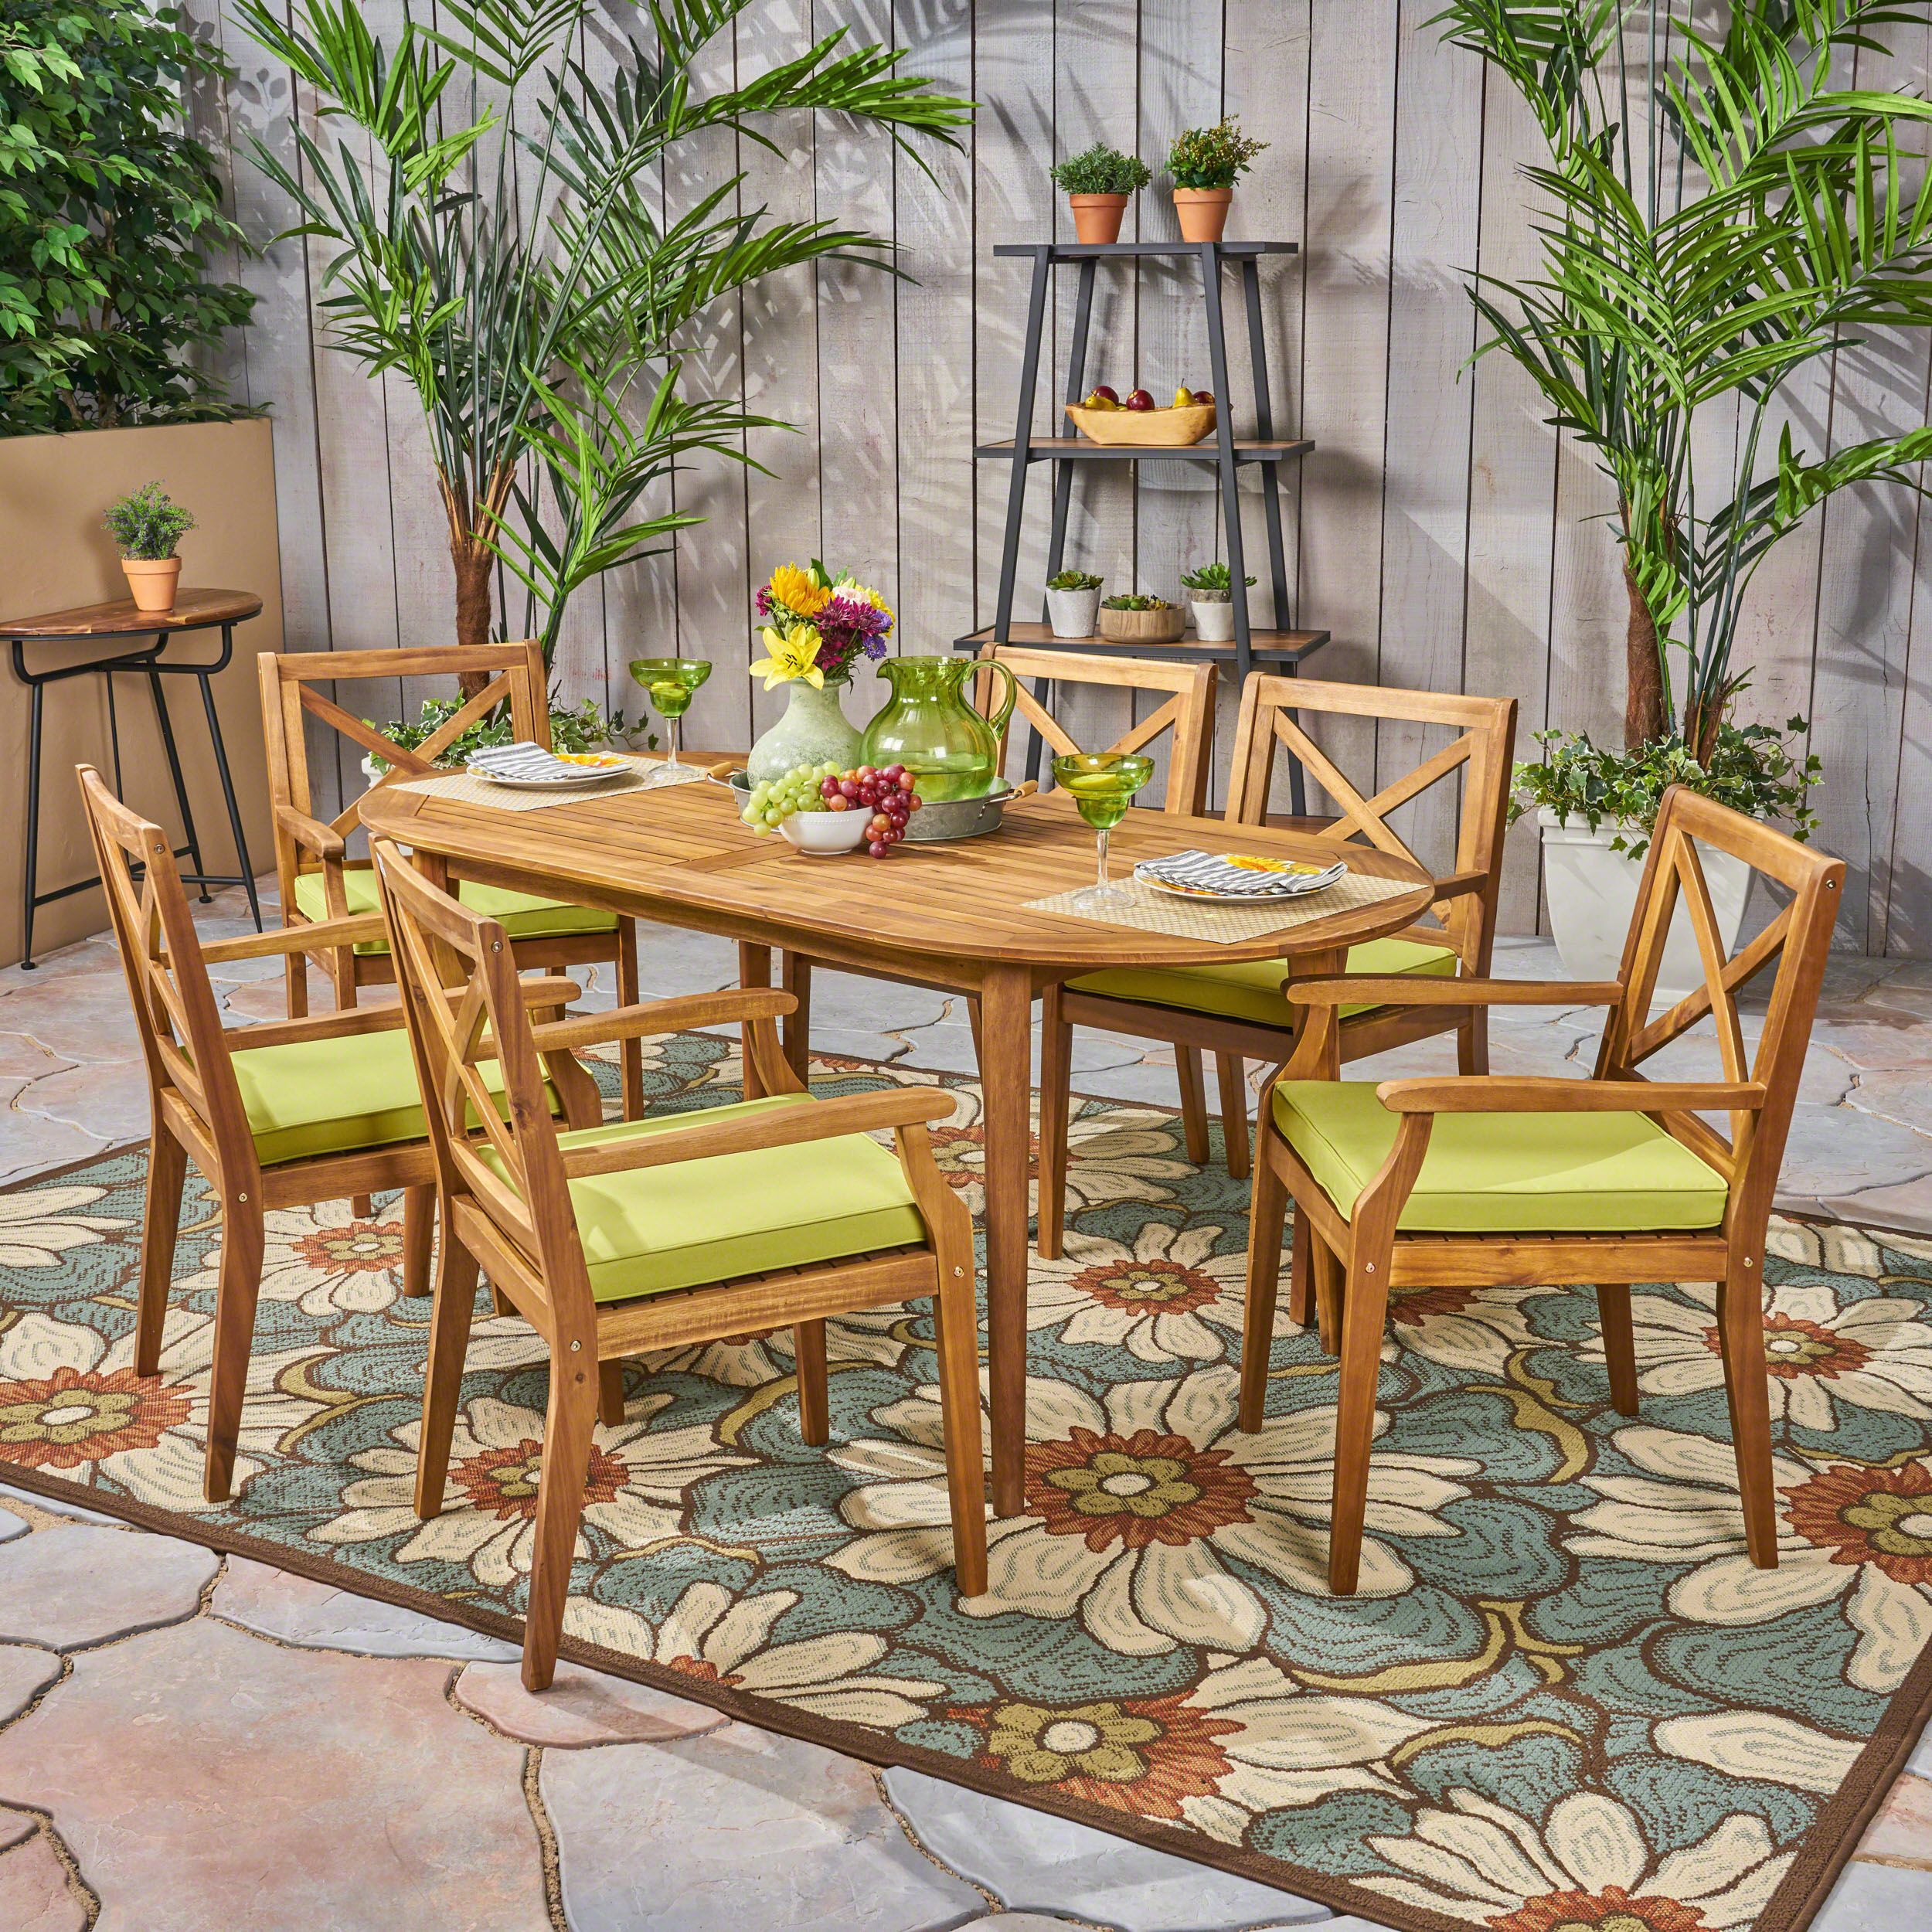 Oakley Outdoor 7 Piece Acacia Wood Dining Set With Cushions, Teak Regarding Acacia Wood Outdoor Seating Patio Sets (View 4 of 15)